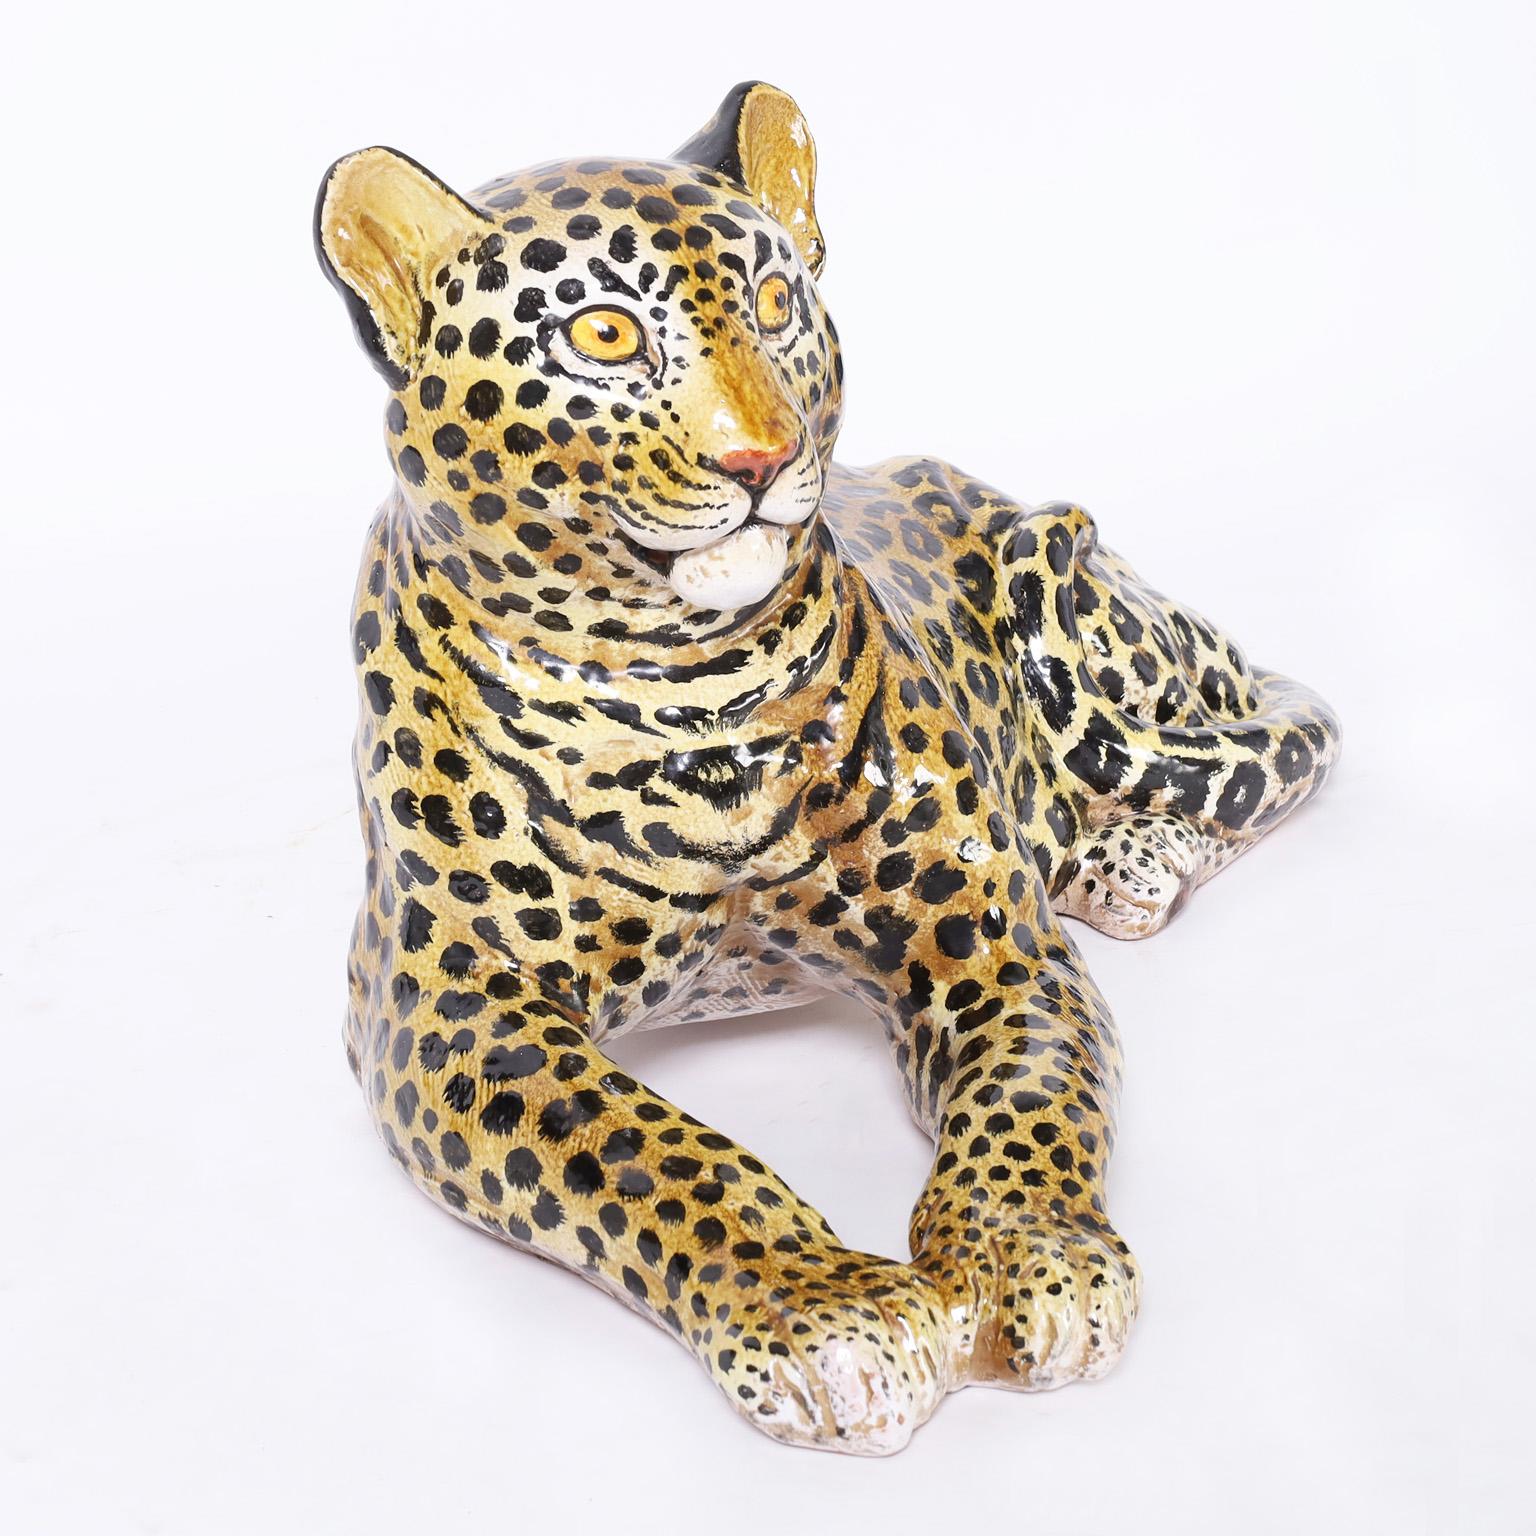 Mid century life size leopard in repose with its iconic spotted coat, crafted in terra cotta, decorated and glazed.